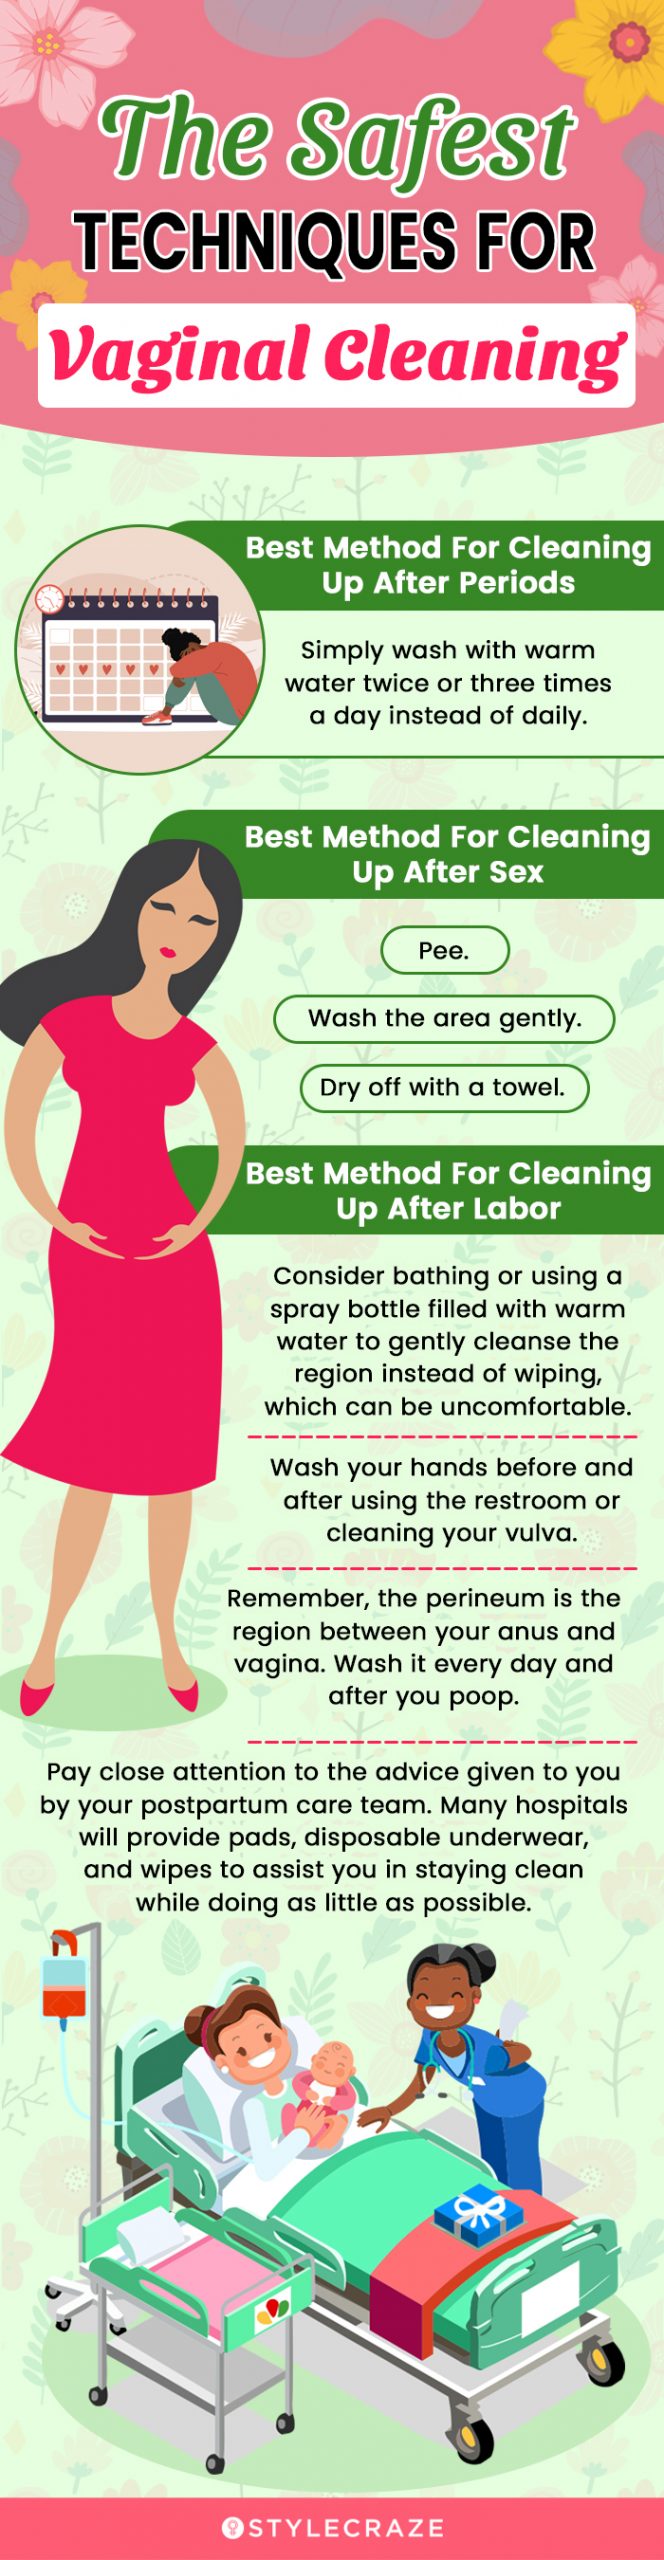 the safest techniques for vaginal cleaning (infographic)